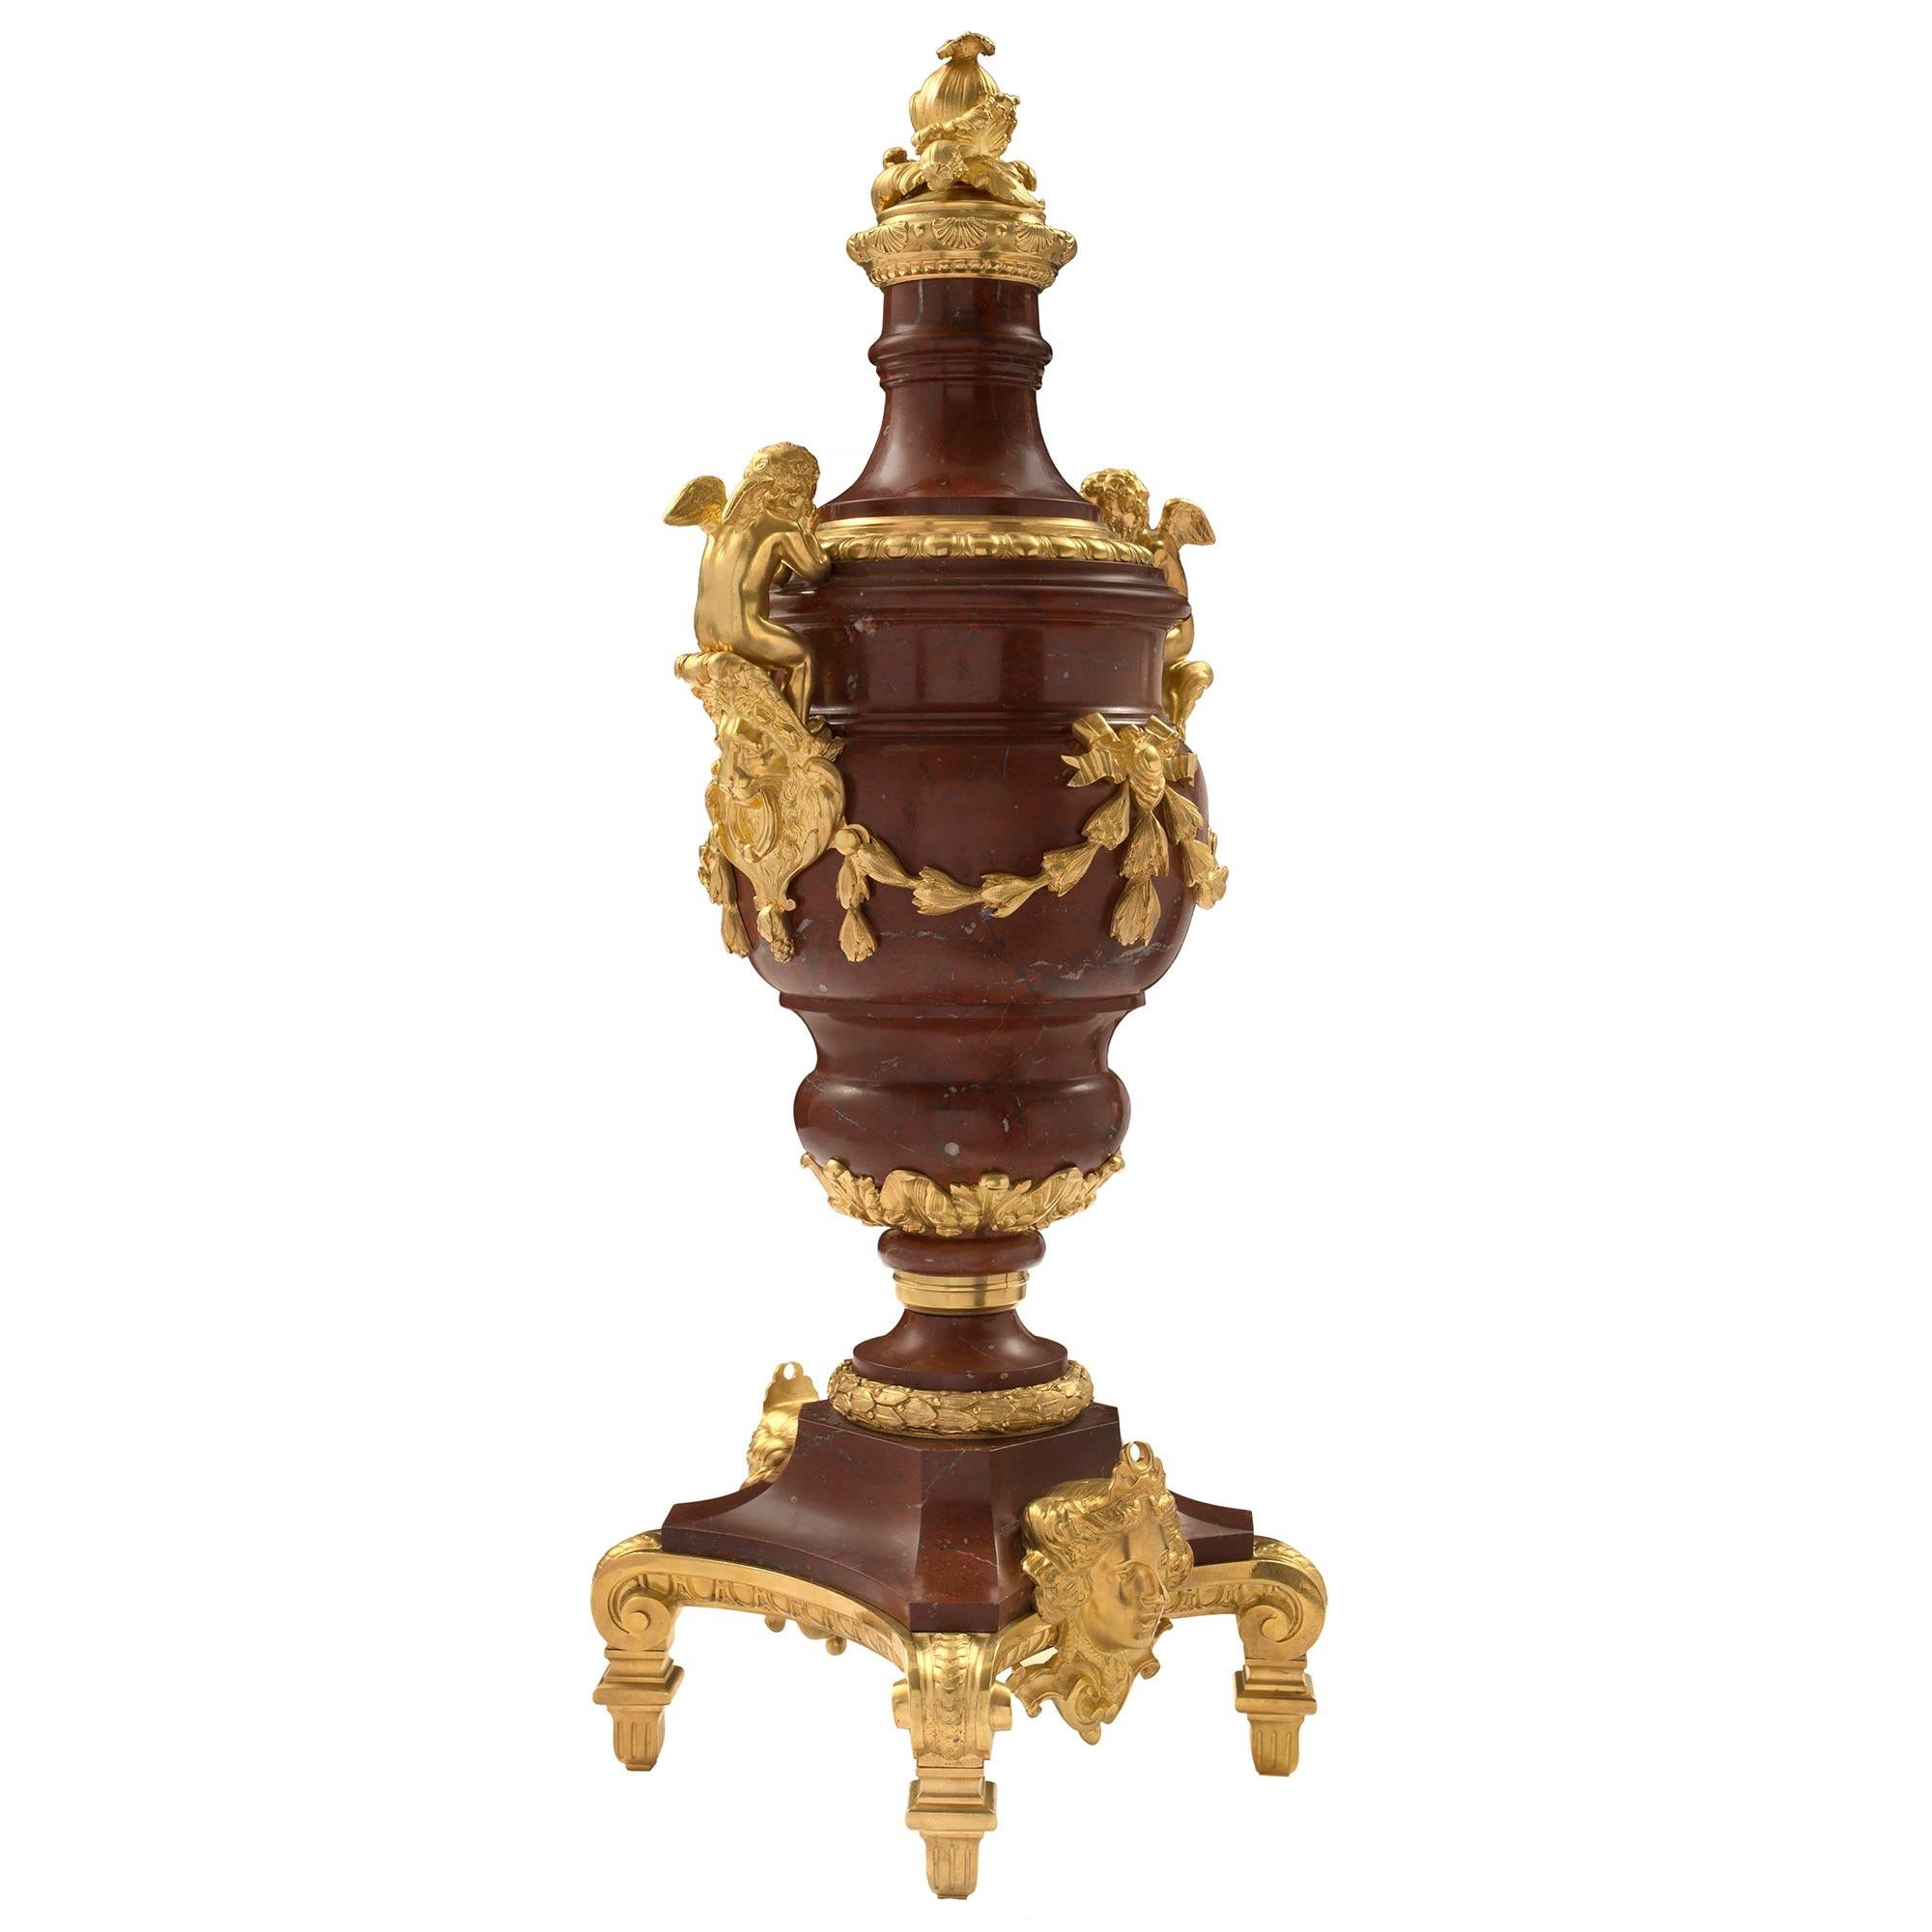 A sensational and large scale pair of French mid 19th century Louis XVI st. Rouge Antique marble and ormolu urns. Each urn is raised by an ormolu base with square feet below rich scrolls and a central richly chased female mask, repeated at the back.